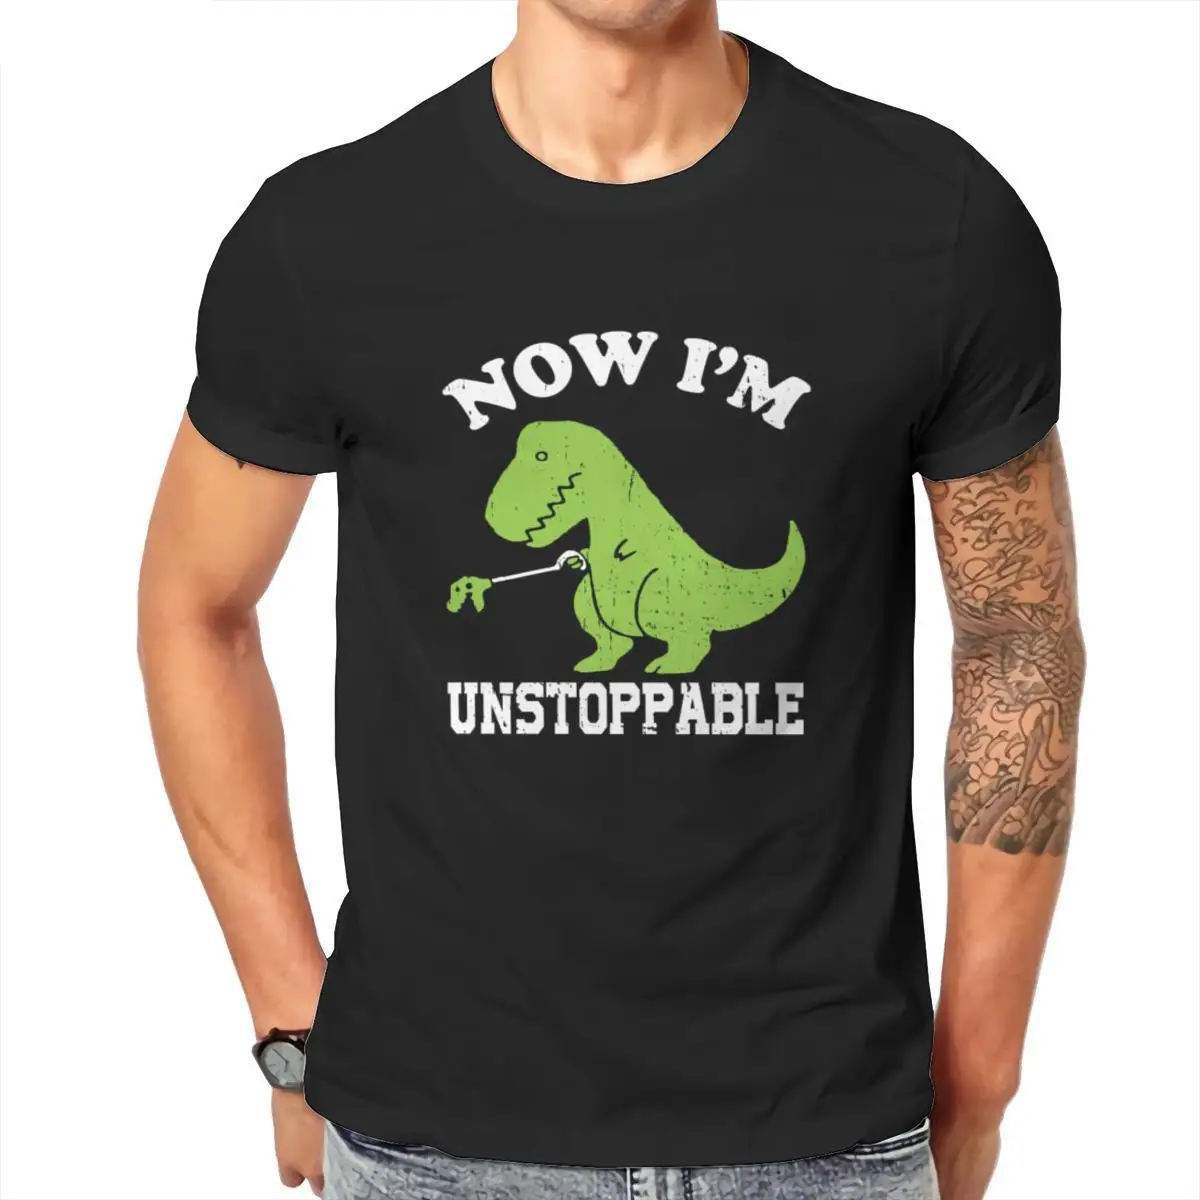 

Wholesale Now I Am Unstoppable Funny T-Rex Men’s Organic T-Shirt New Female Unisex JapaneseStyle Mens Clothes 104874